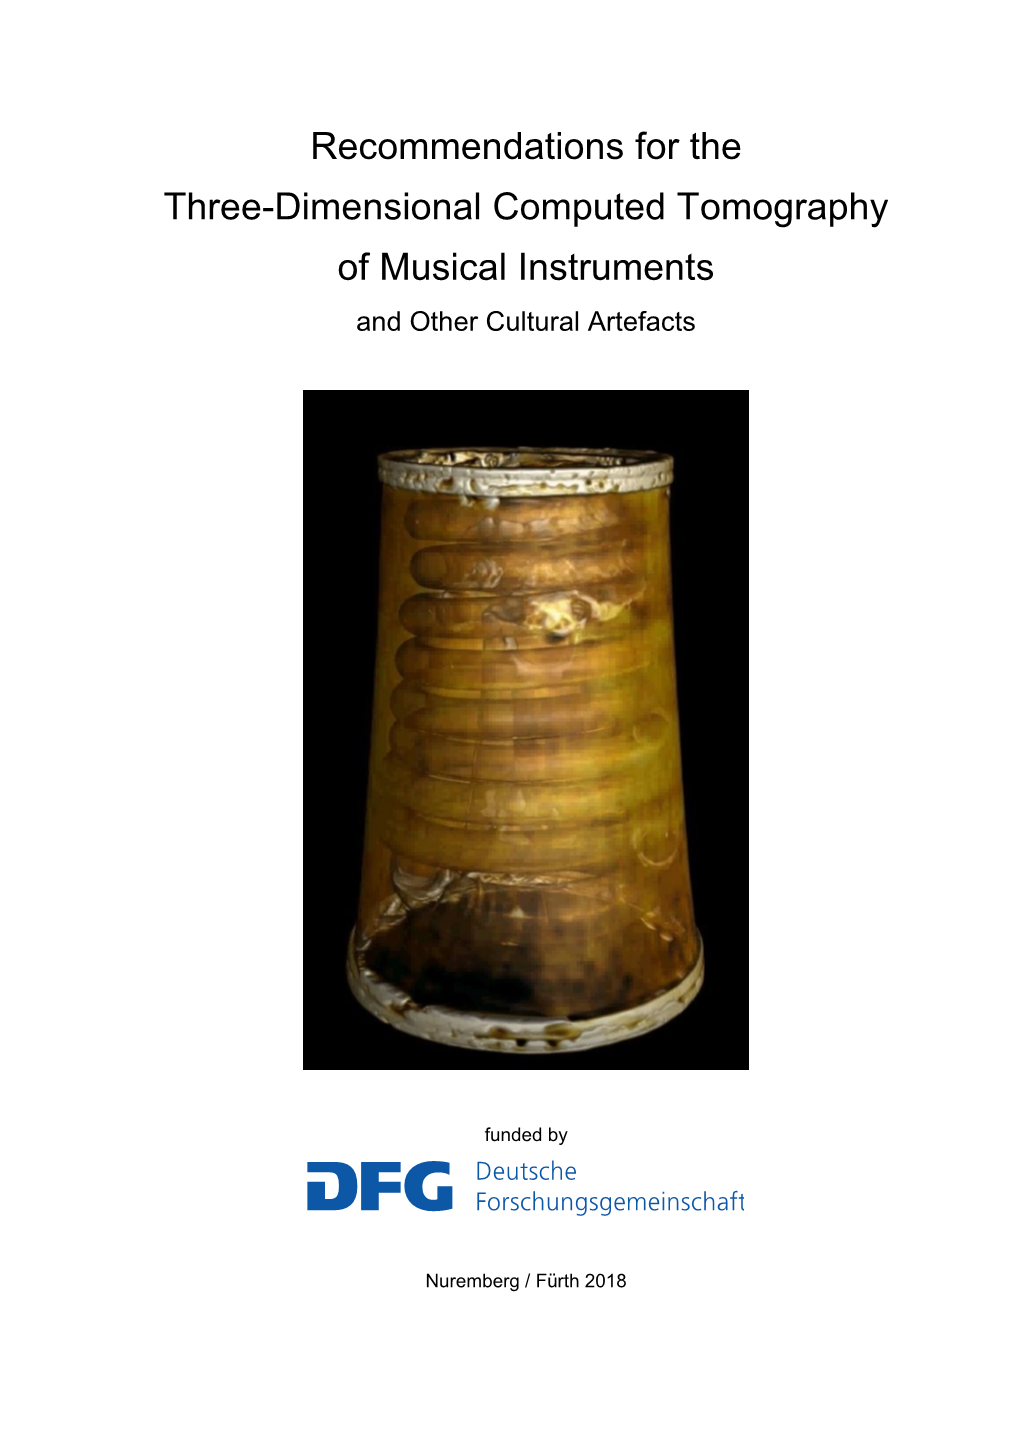 Recommendations for the Three-Dimensional Computed Tomography of Musical Instruments and Other Cultural Artefacts